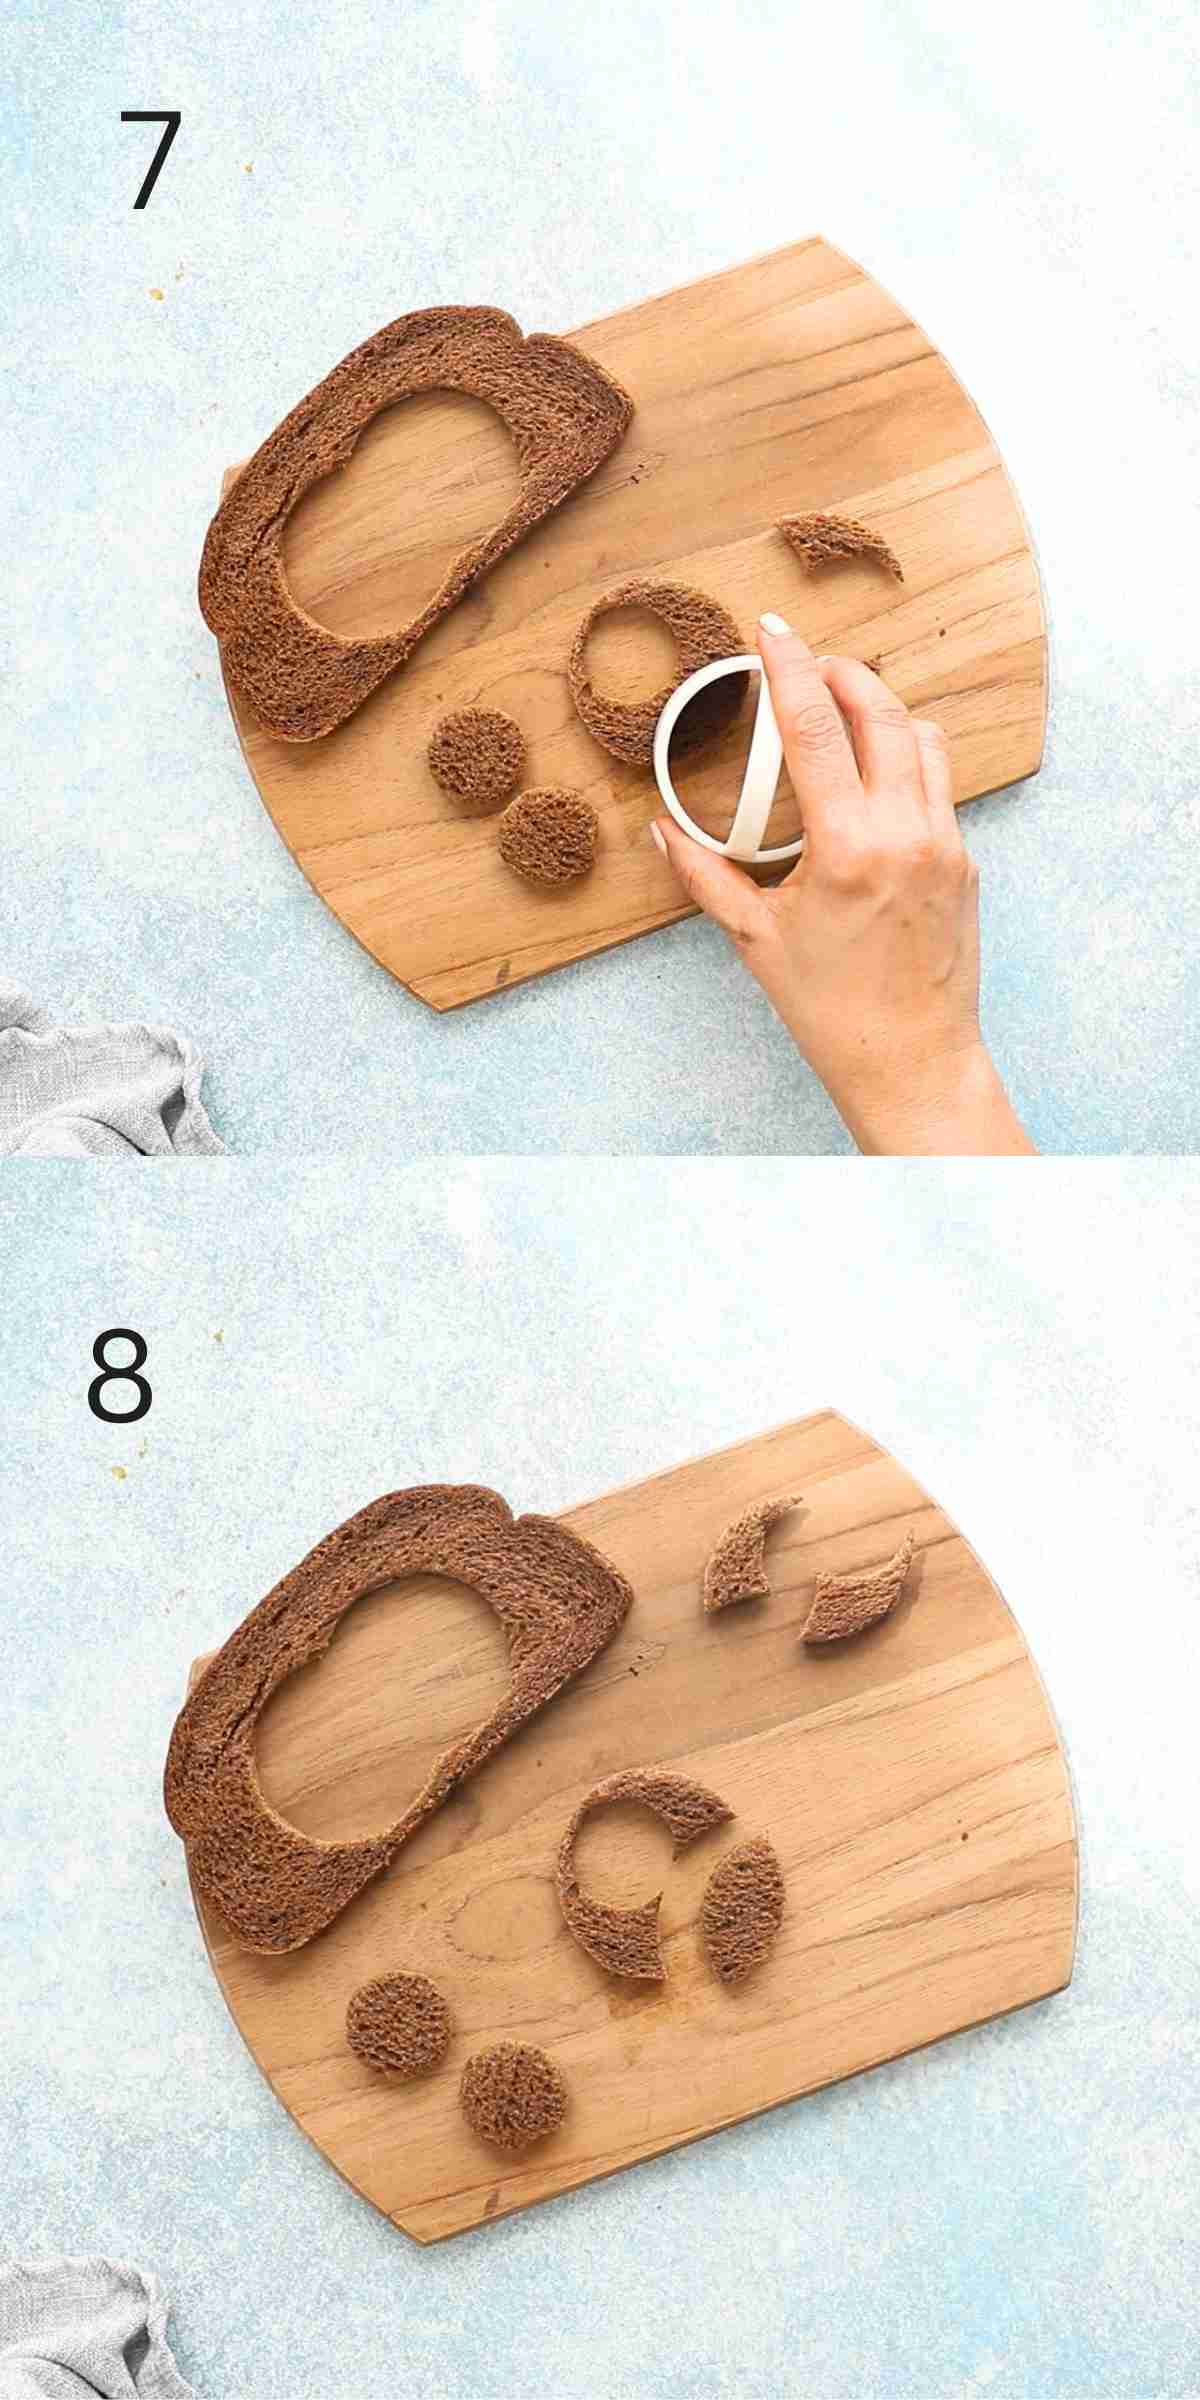 2 photo collage of a hand punching out shapes from a slice of bread.